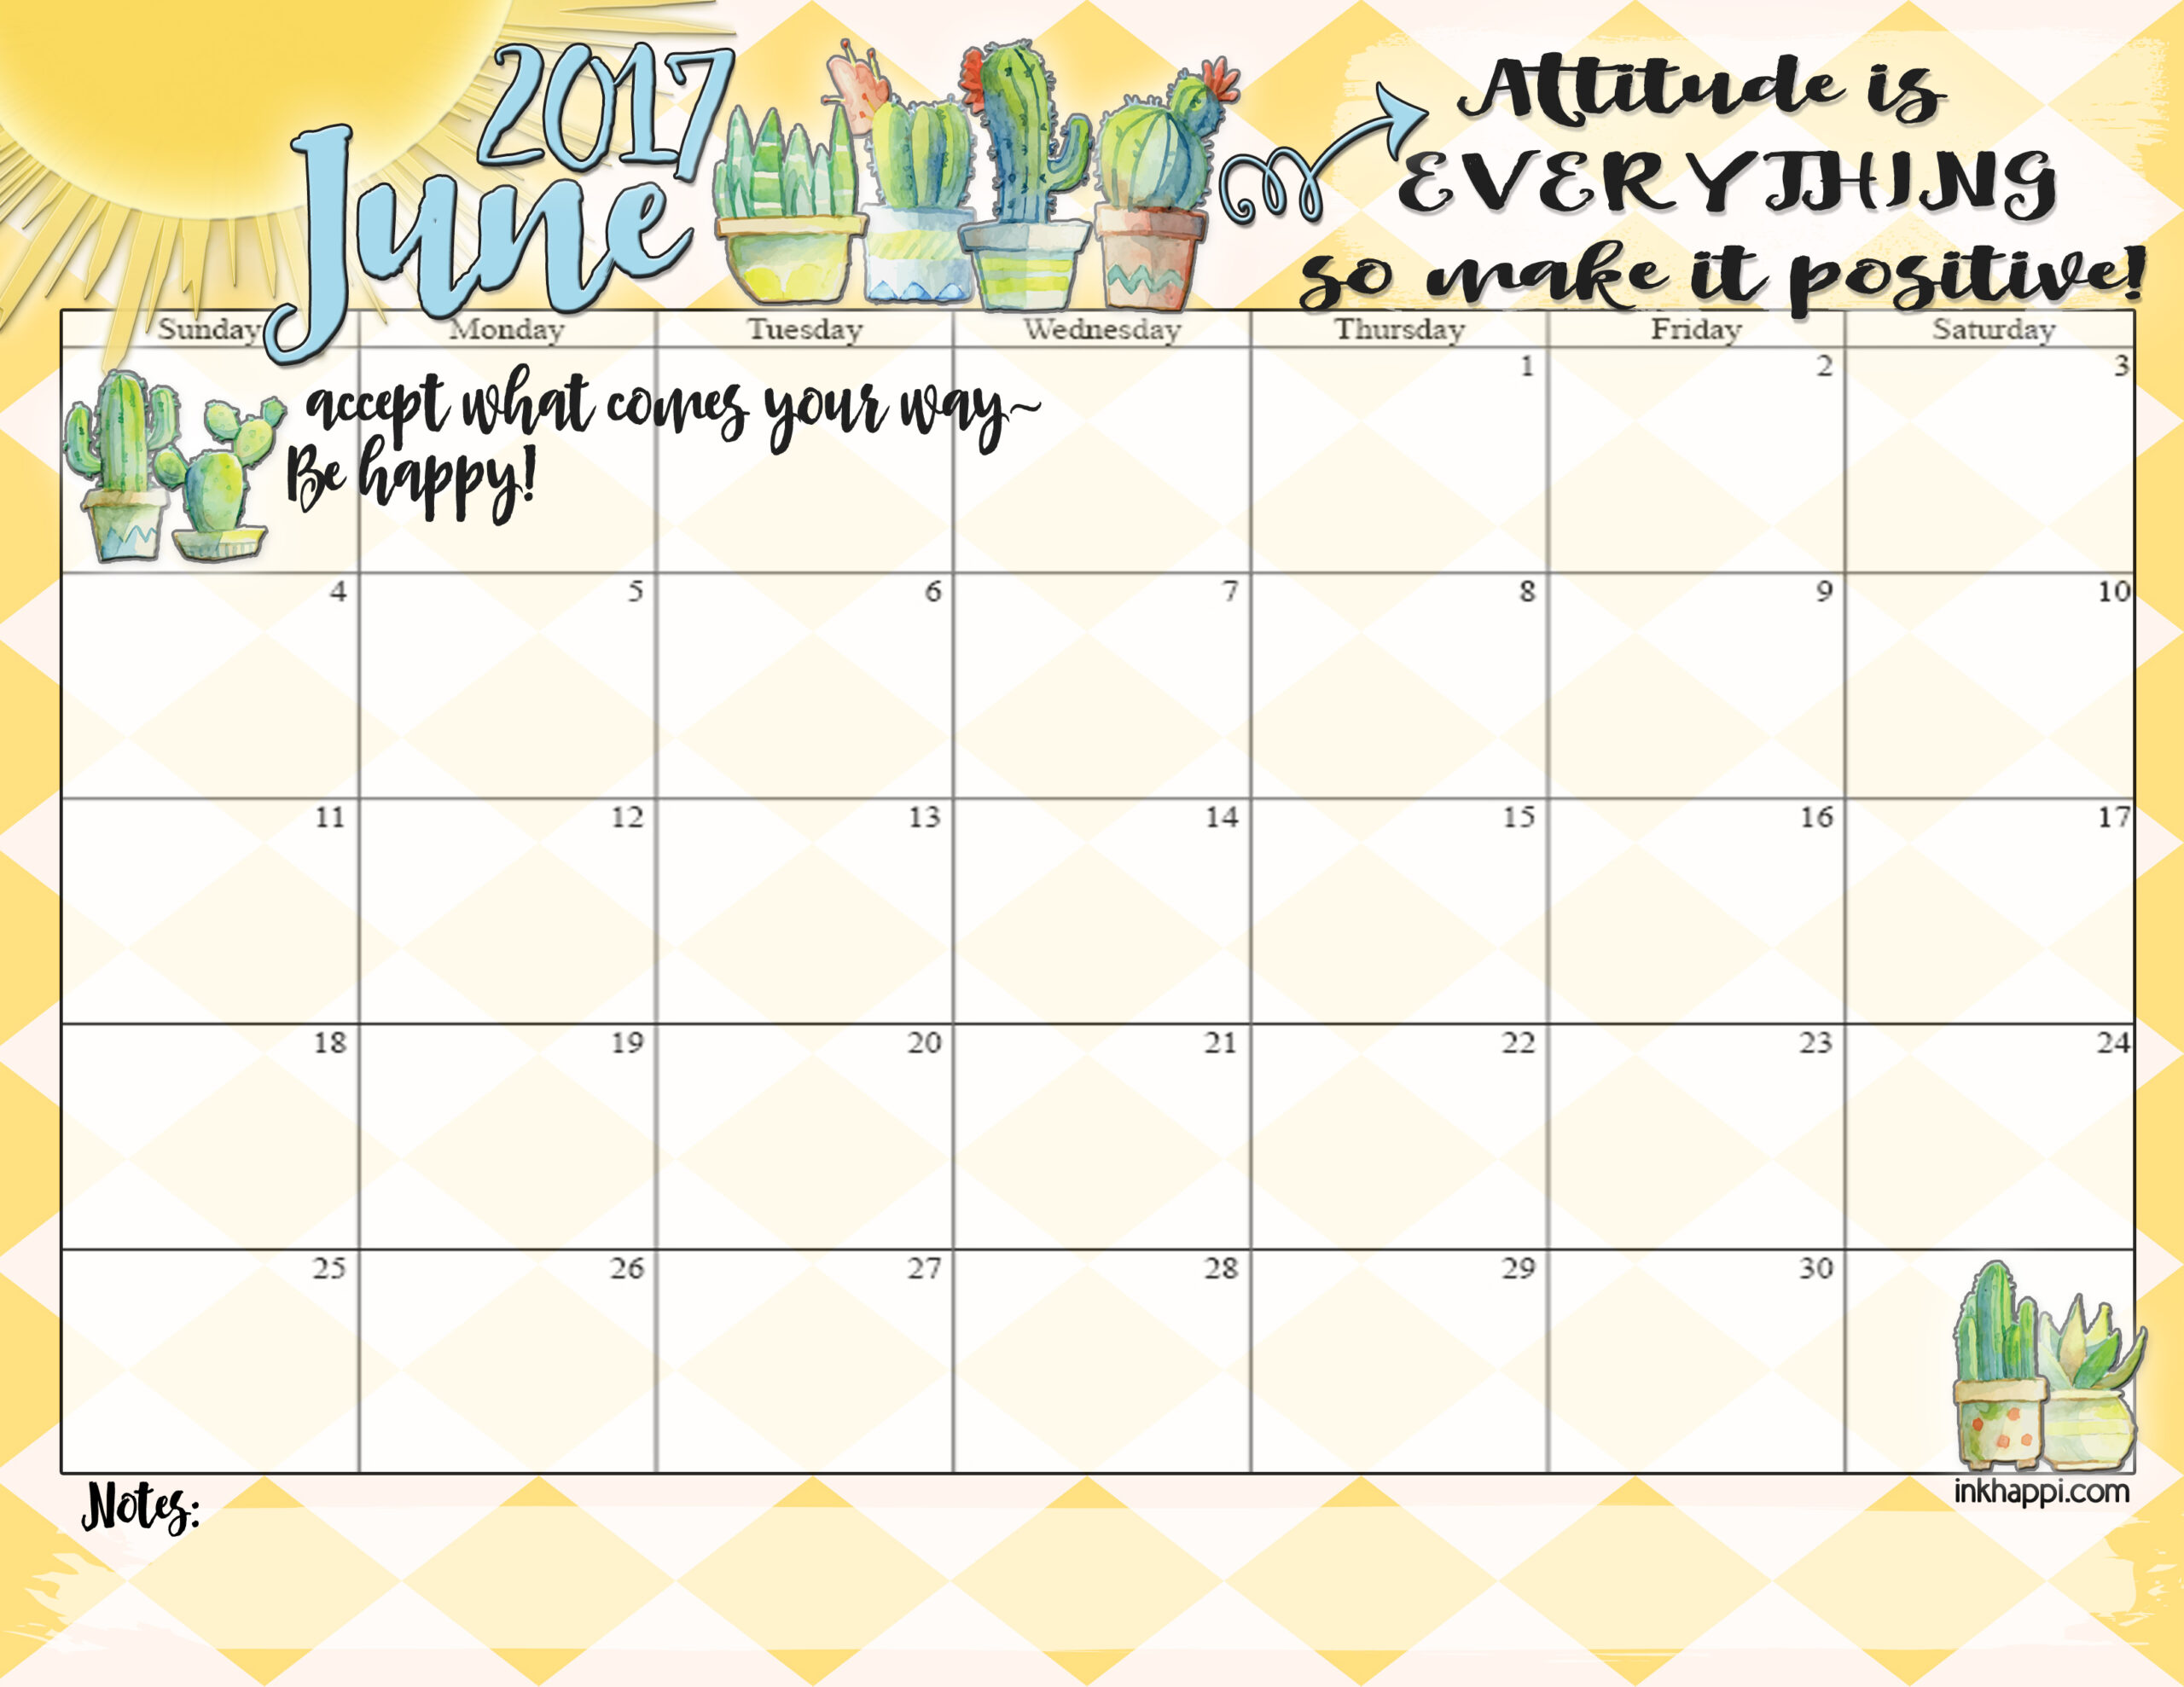 June 2017 Calendar Is Here With A Bit Of &quot;Attitude